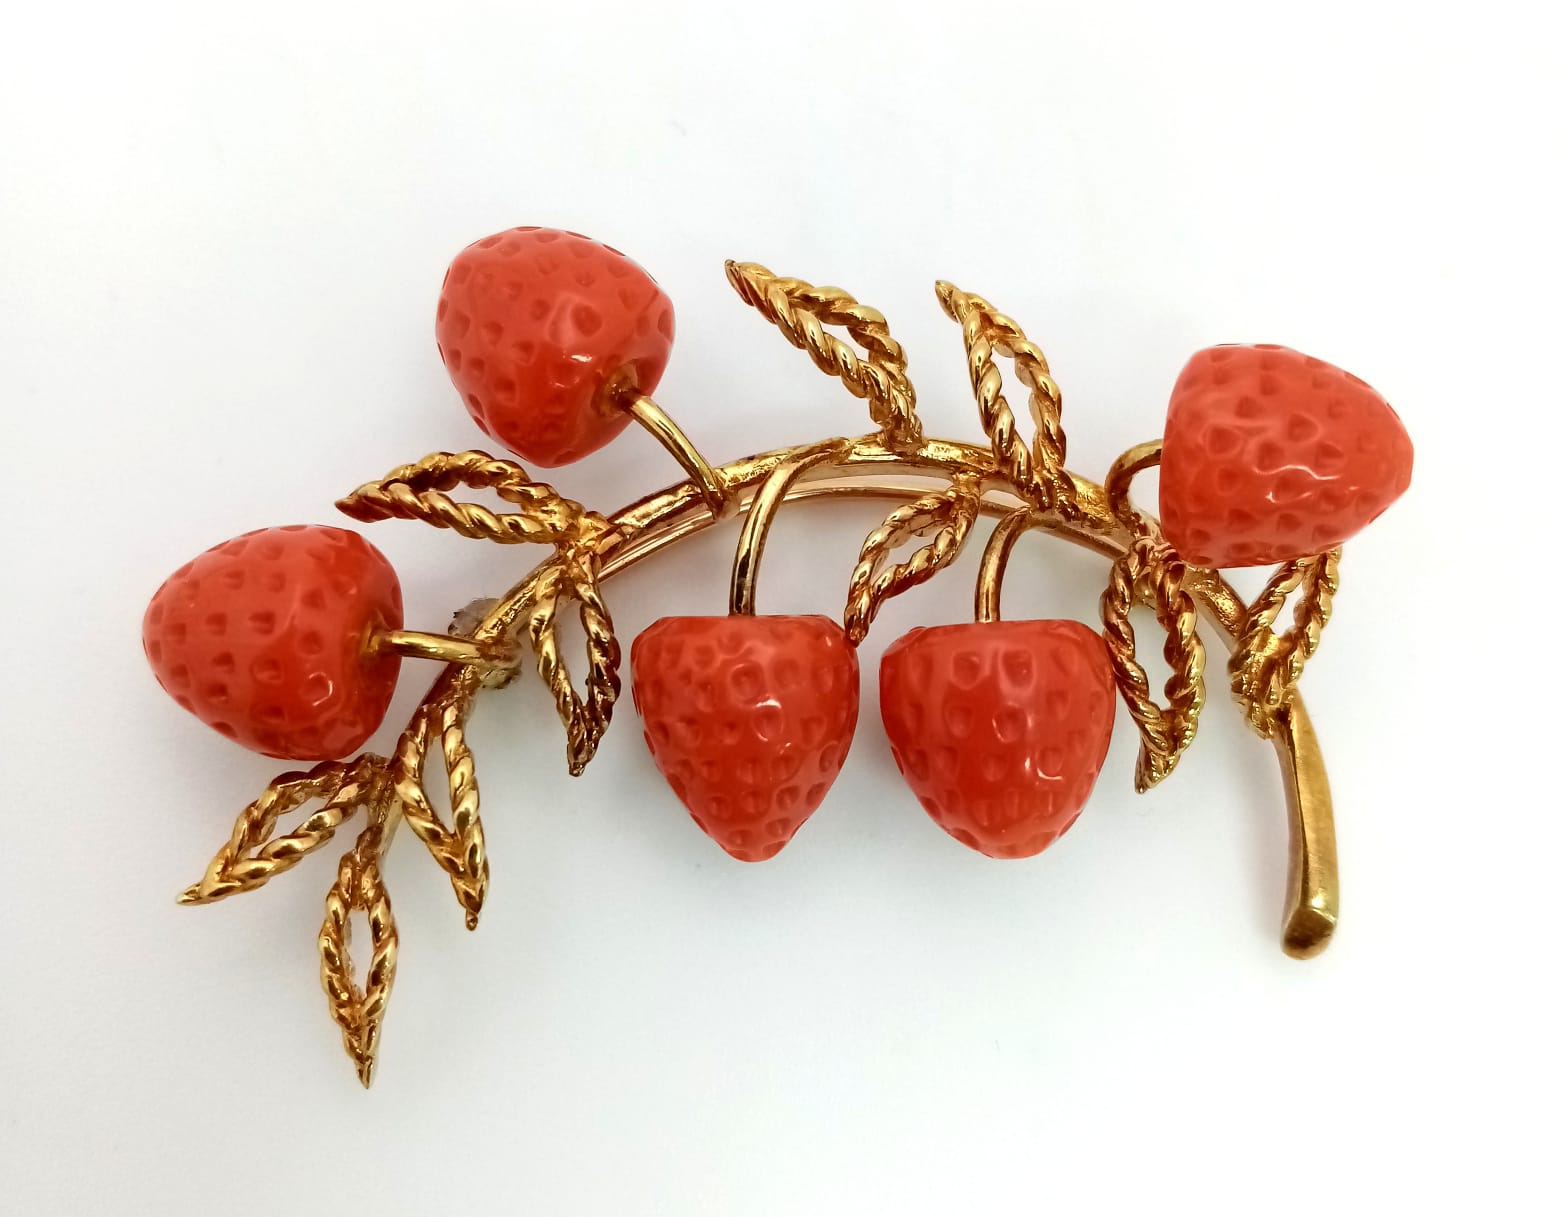 A vintage, 14 K yellow gold brooch with red coral strawberries. Length: 50 mm, weight: 15 g. 14249 - Image 3 of 4